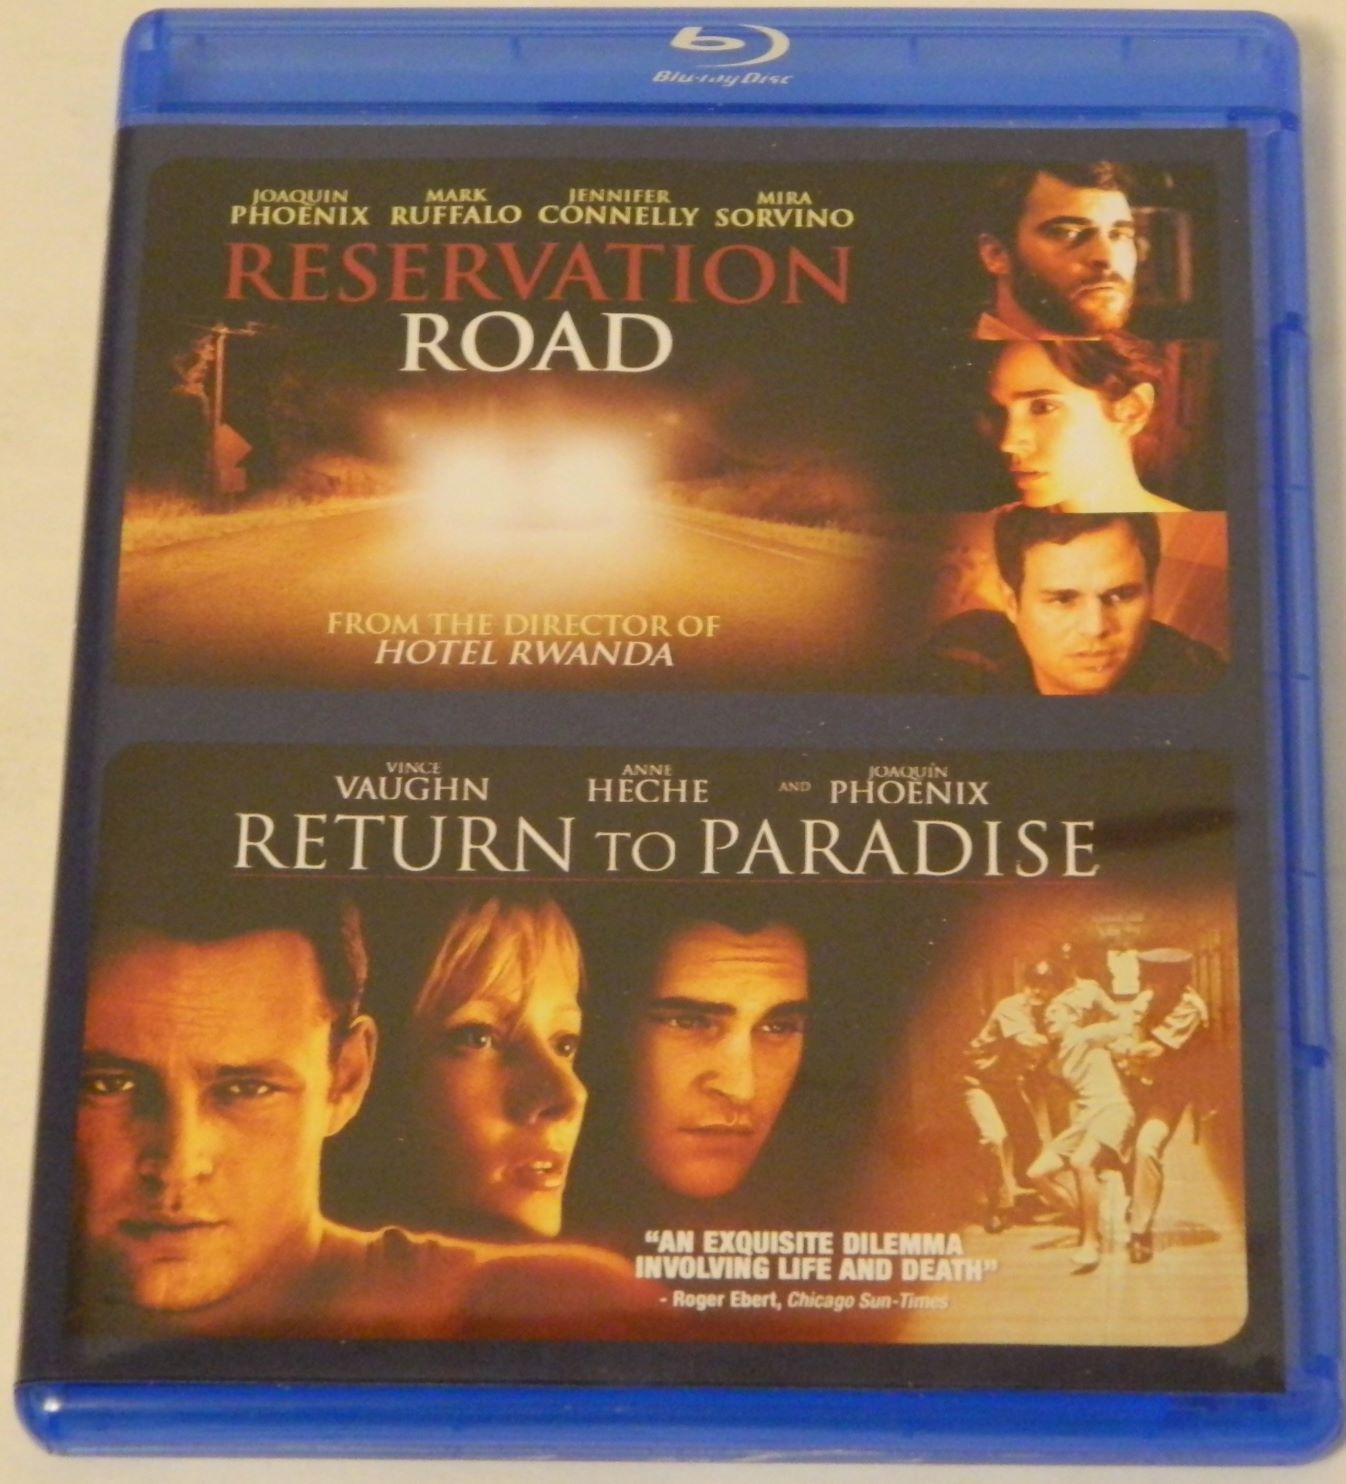 Reservation Road/Return to Paradise Double Feature Blu-ray Review